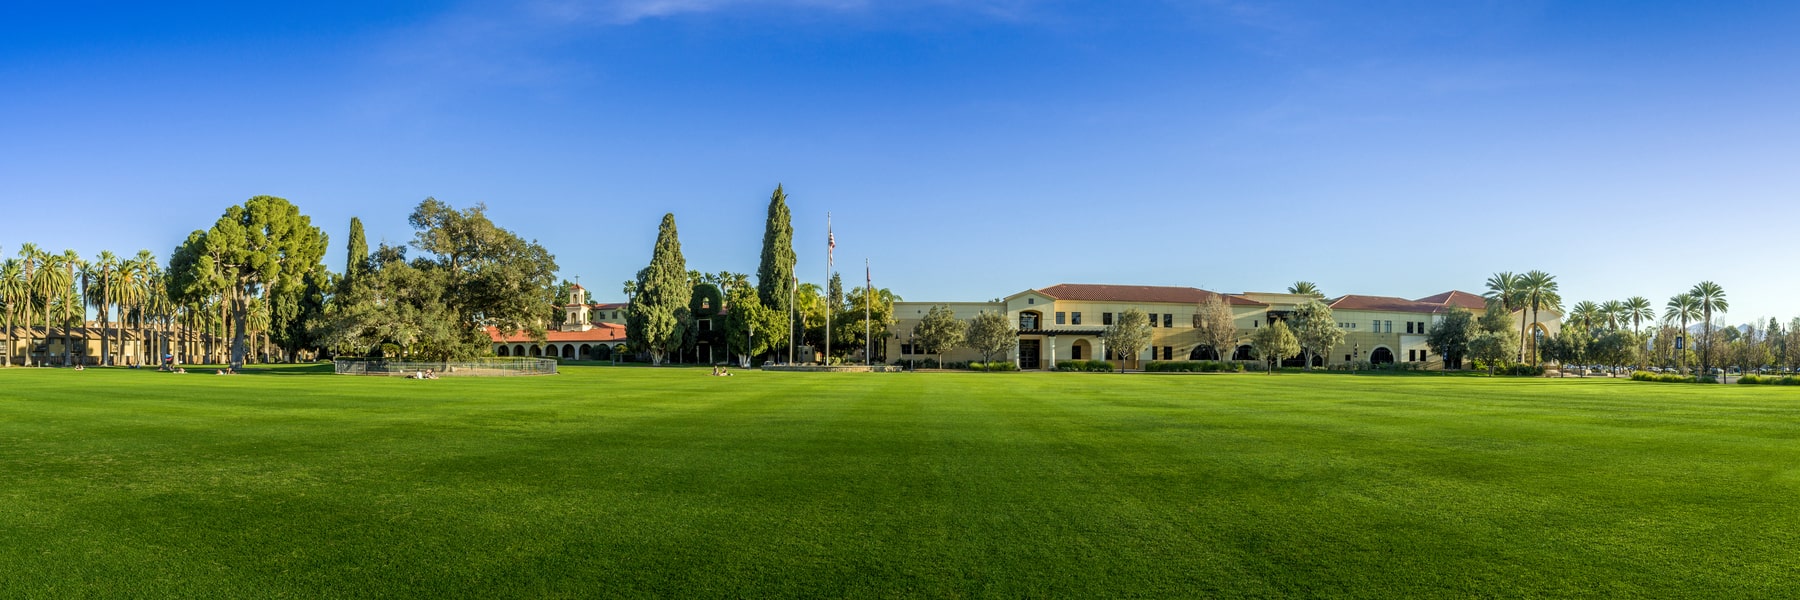 Front lawn of California Baptist University with campus buildings in the distance